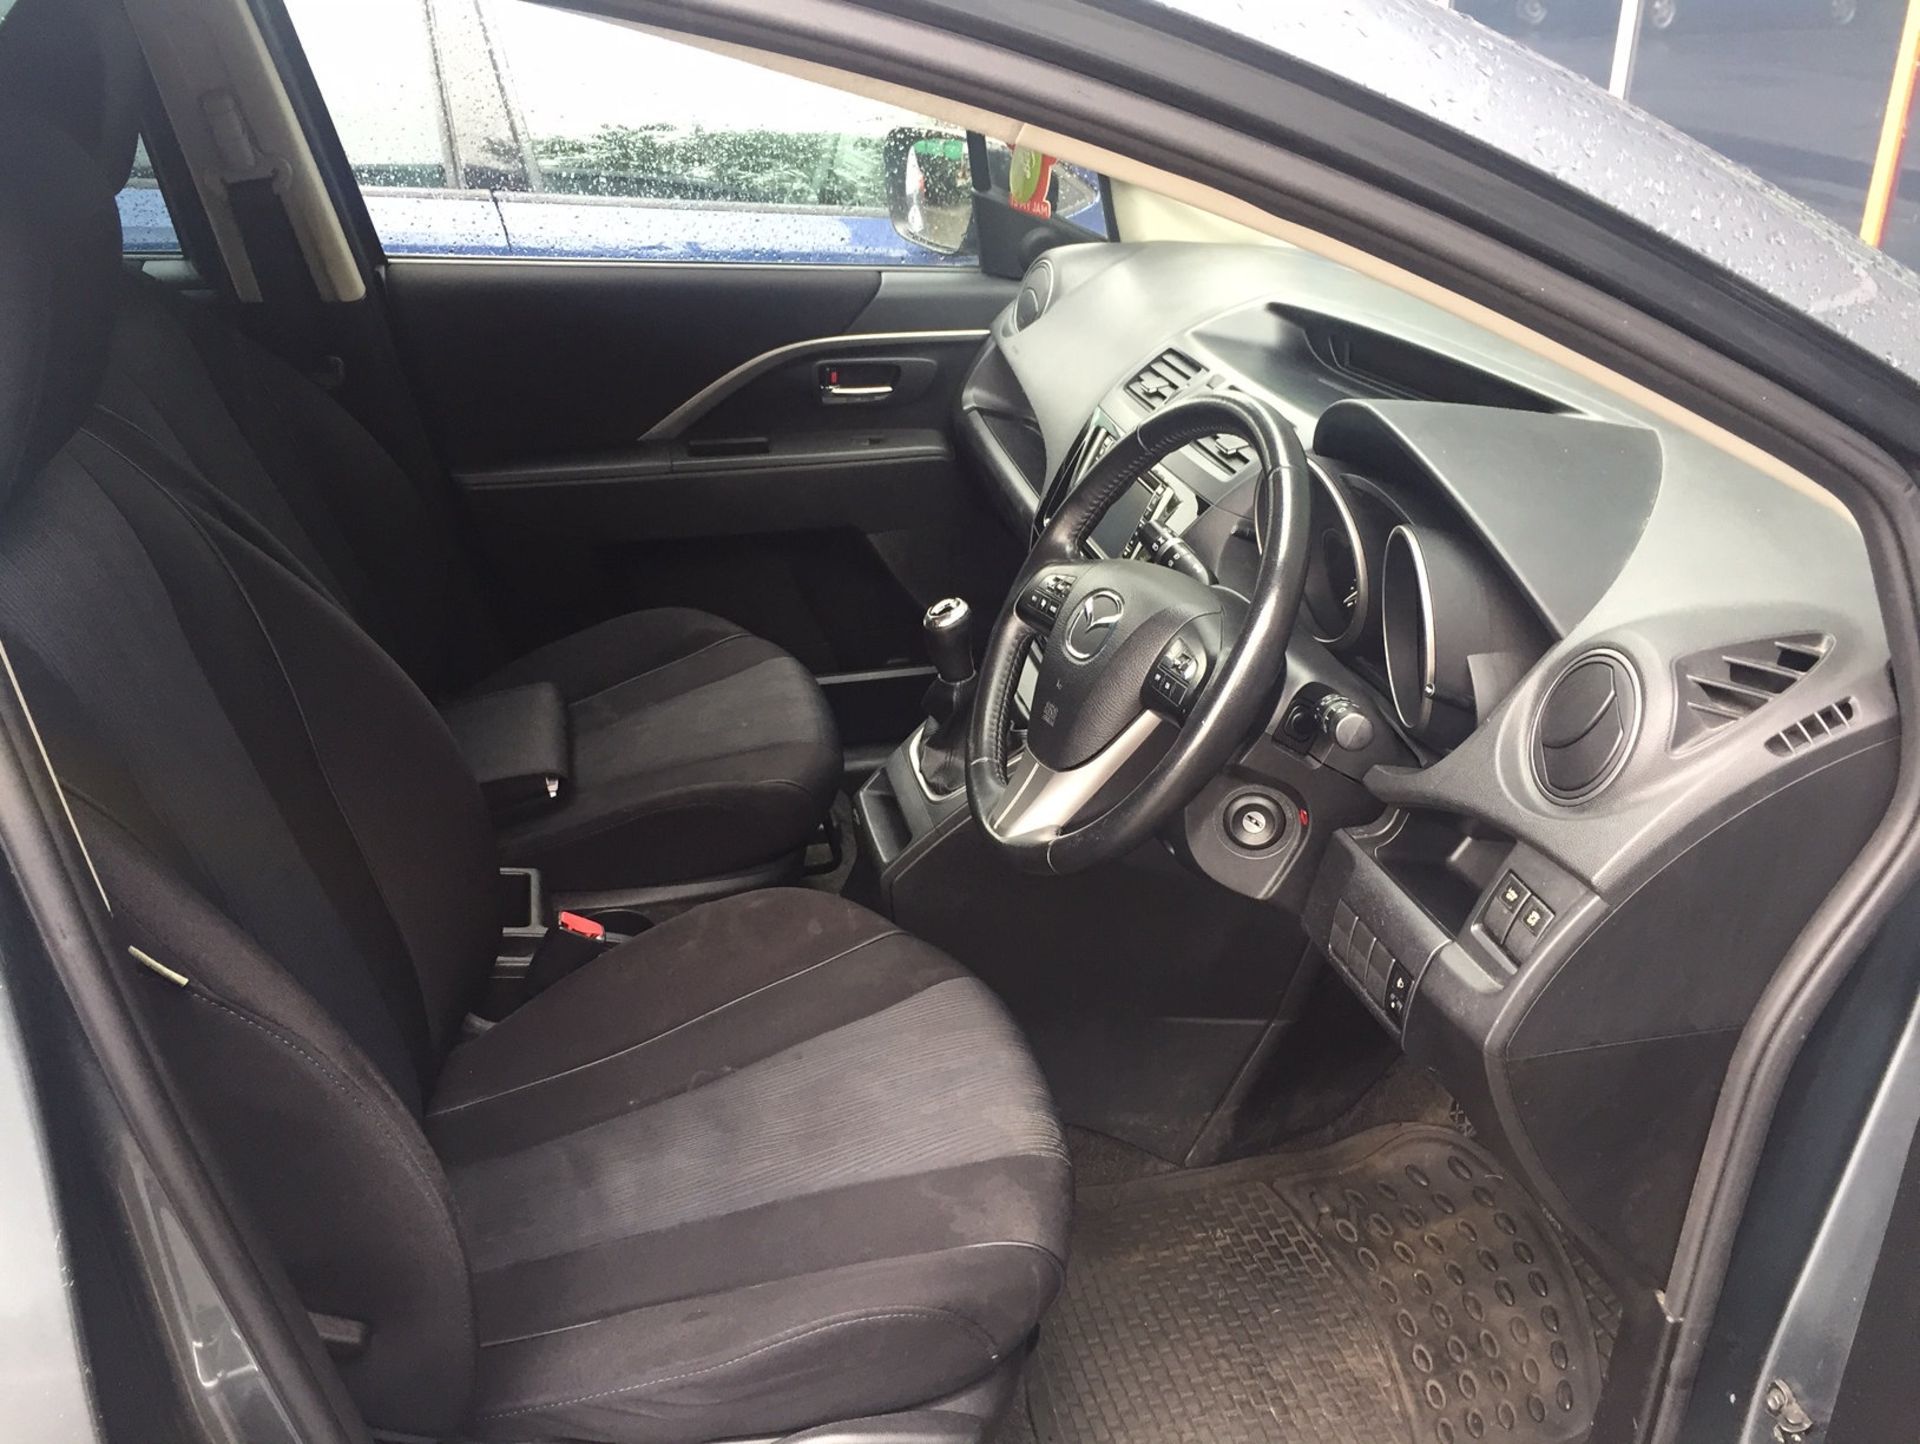 2013 Mazda 5 2.0 Venture Edition 5 Dr MPV - CL505 - NO VAT ON THE HAMMER - Location: Corby, N - Image 15 of 18